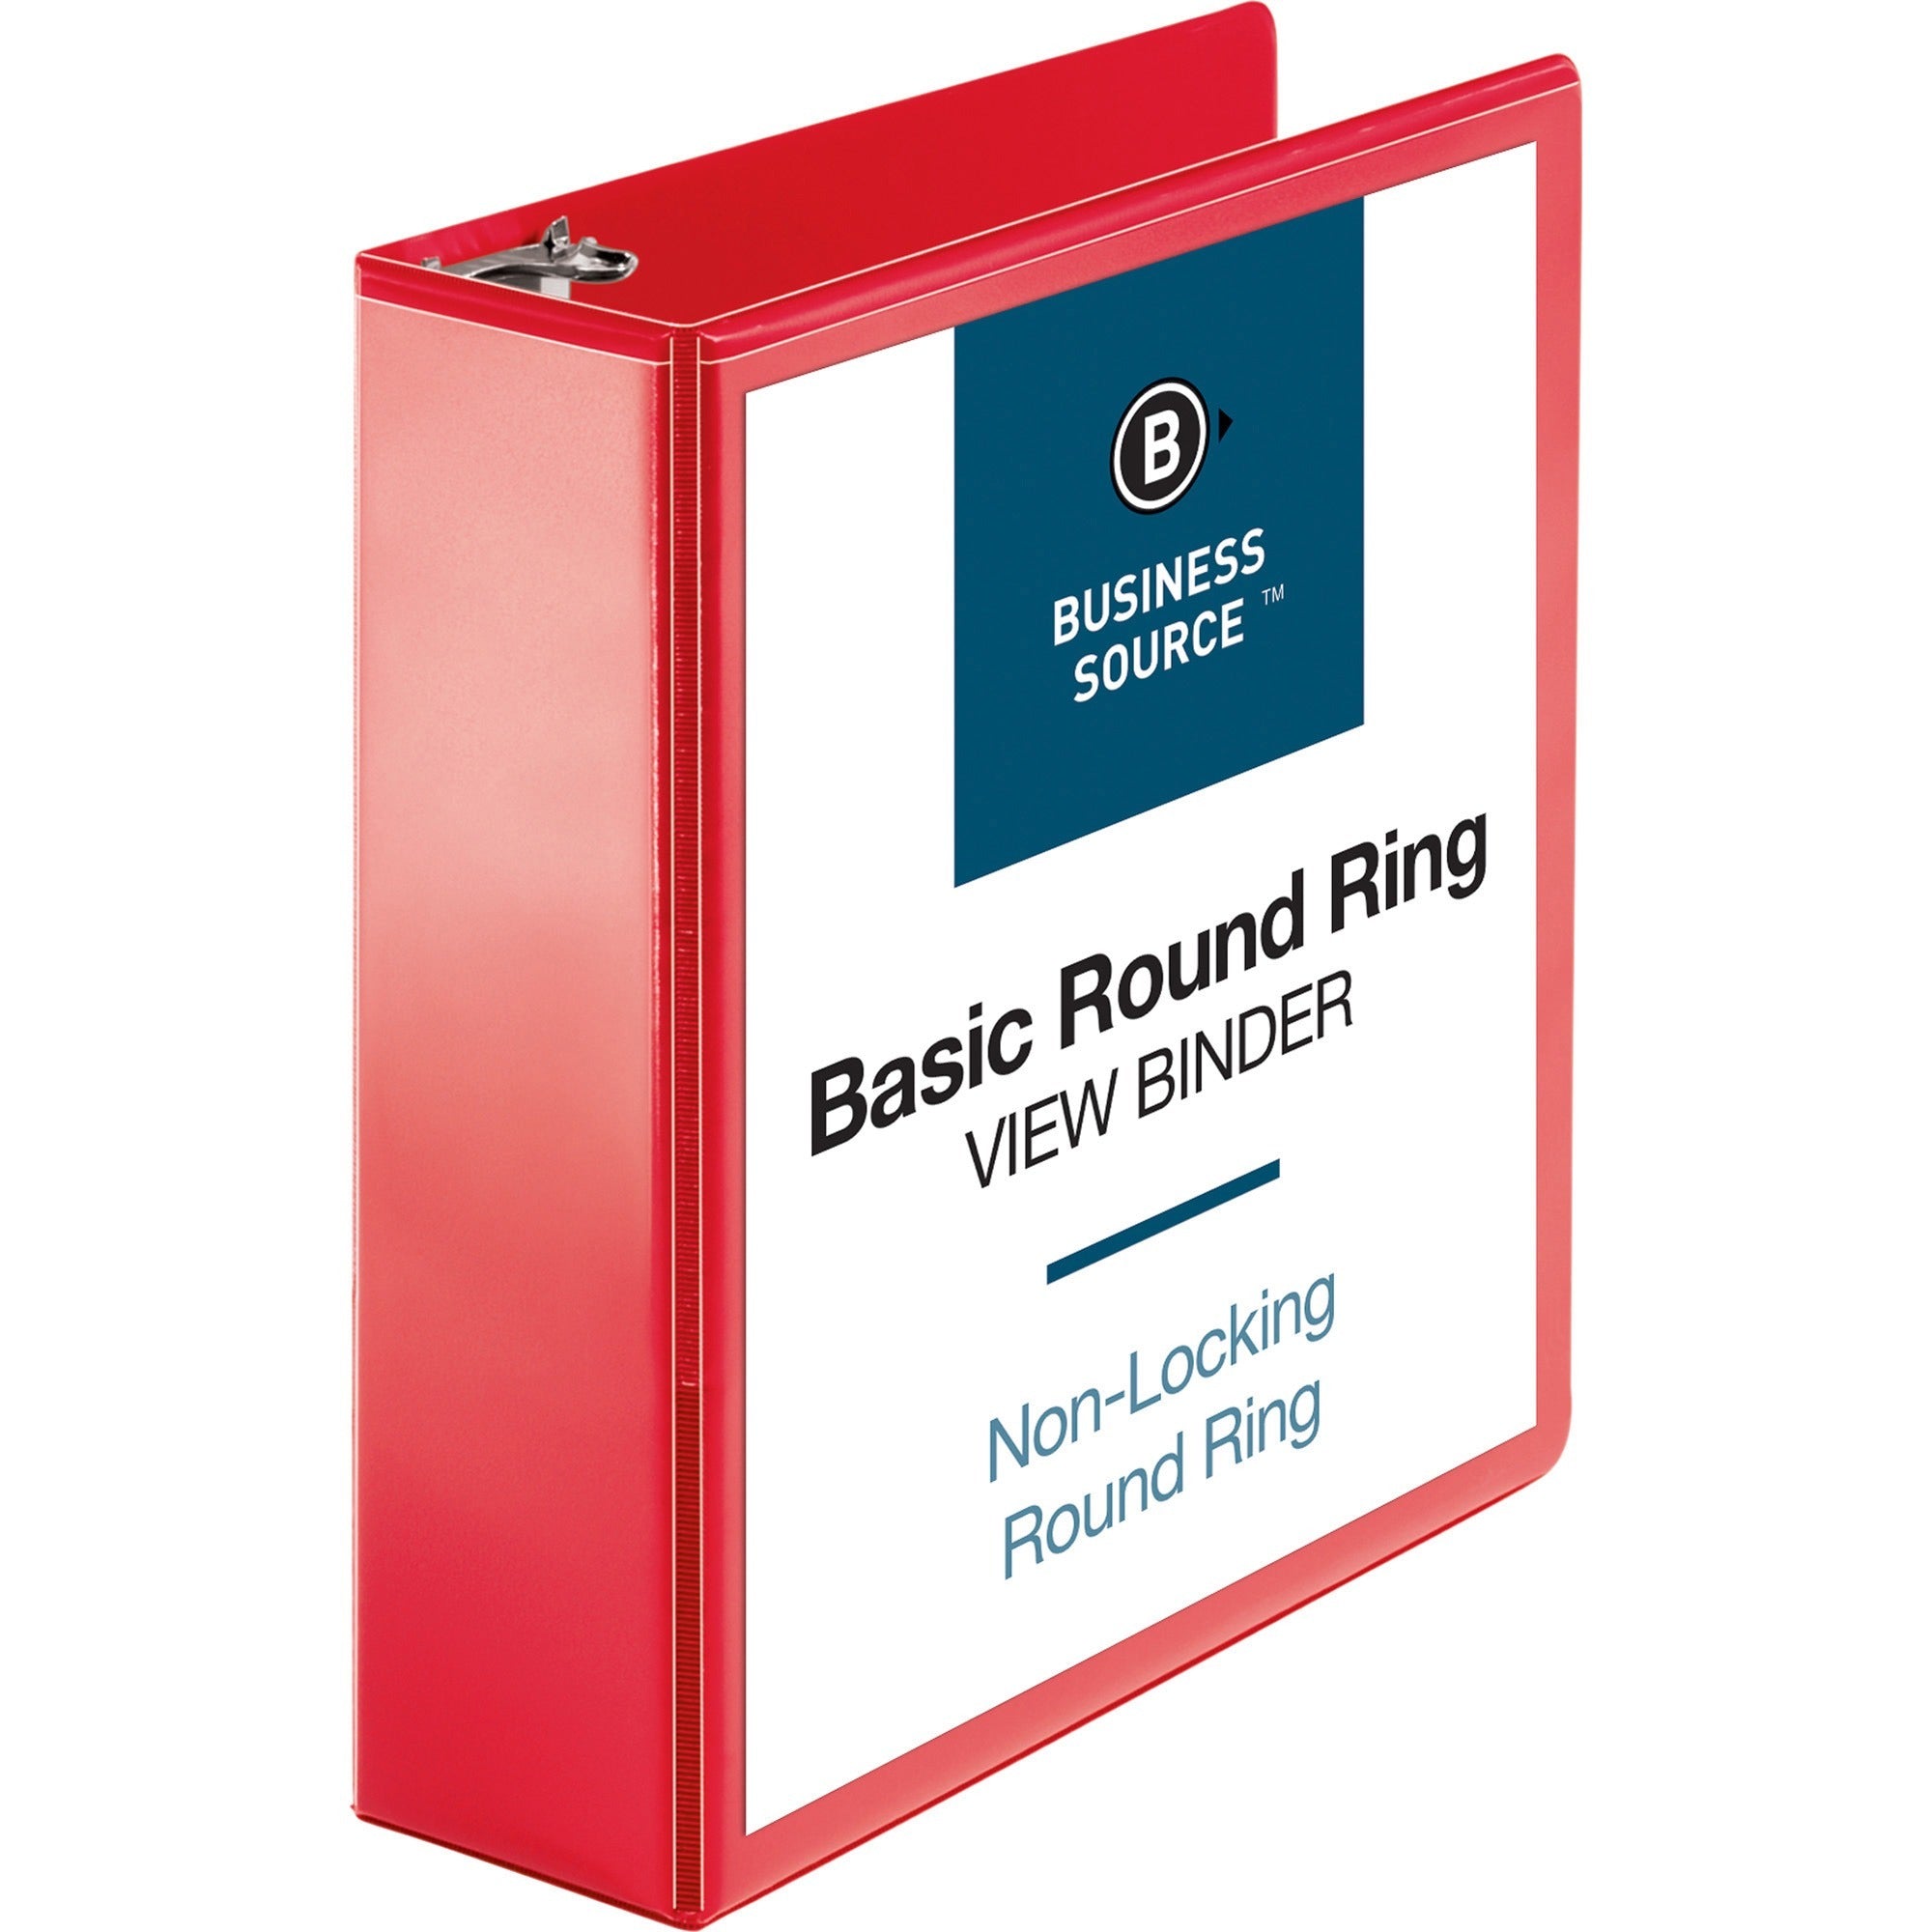 business-source-round-ring-binder-3-binder-capacity-round-ring-fasteners-2-internal-pockets-red-clear-overlay-labeling-area-1-each_bsn09969 - 1